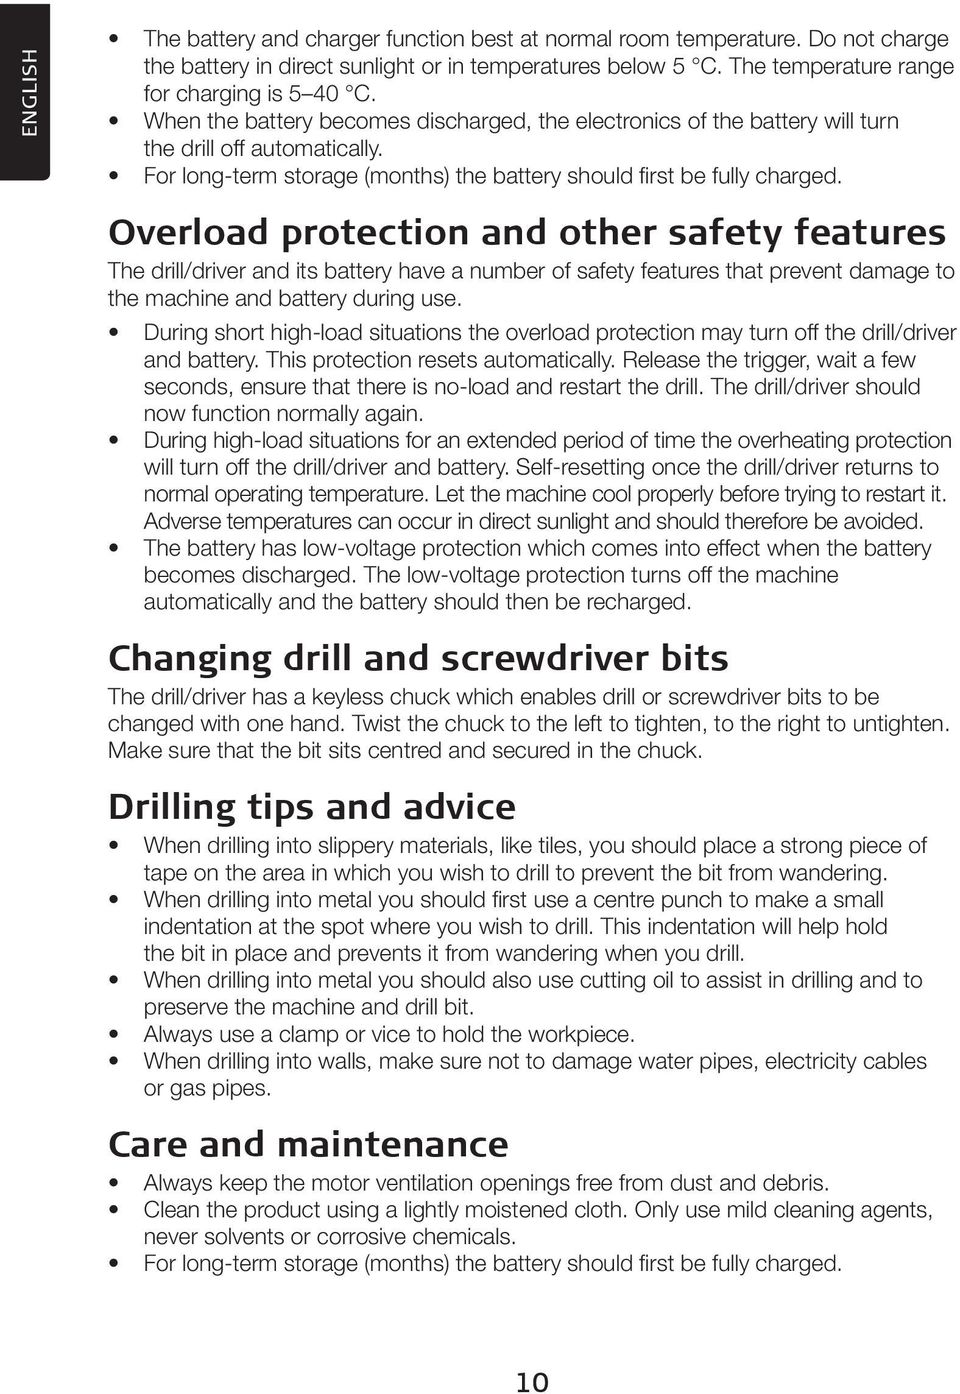 Overload protection and other safety features The drill/driver and its battery have a number of safety features that prevent damage to the machine and battery during use.